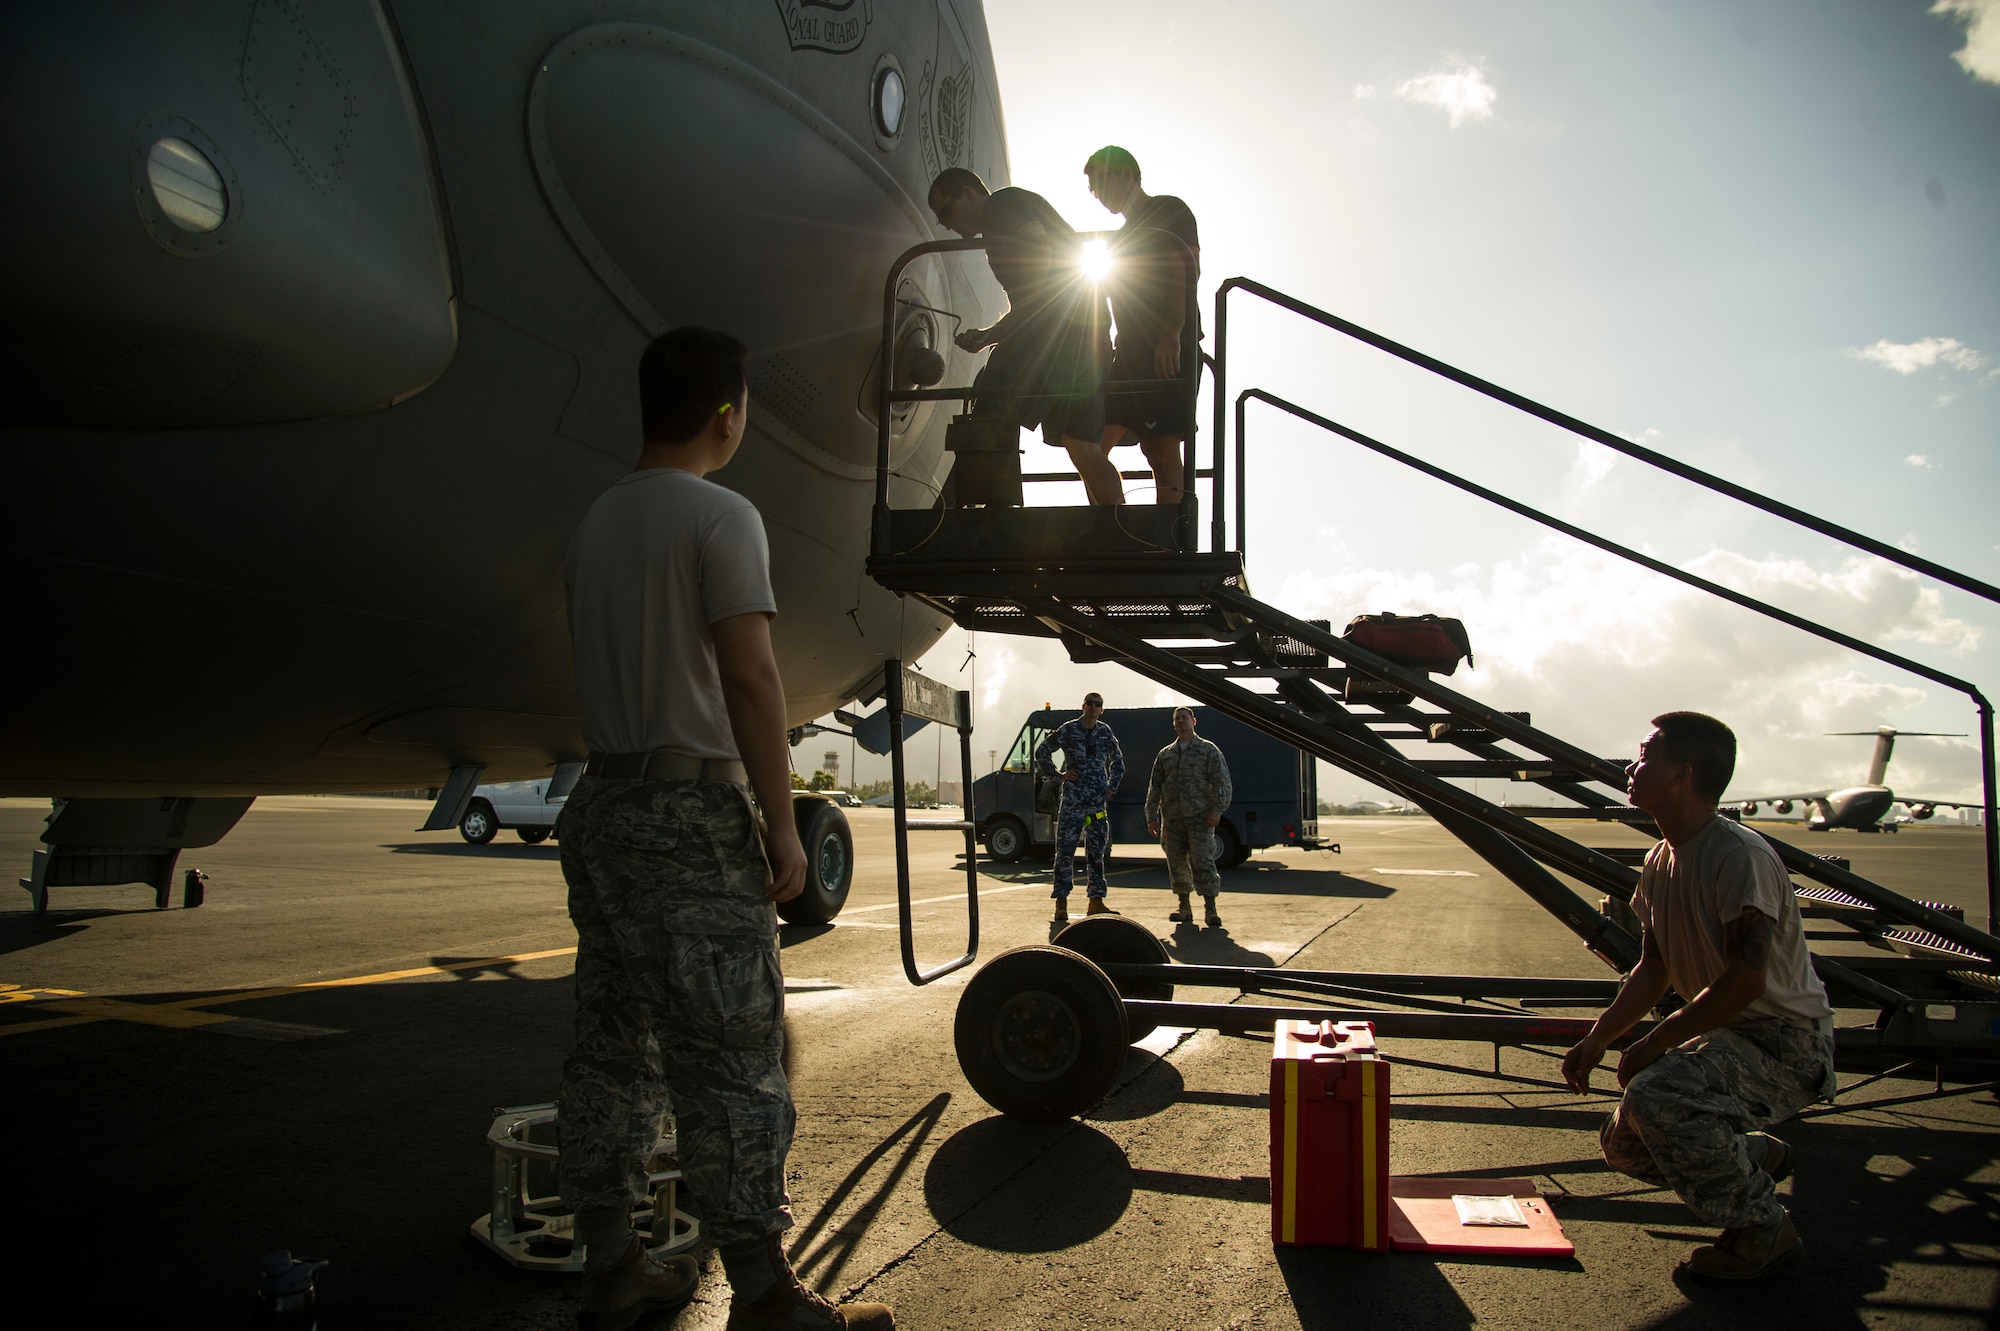 Maintainers from the 15th Maintenance Group and members from the 36th Squadron, Royal Australian Air Force Base Amberley, perform maintenance on a C-17 Globemaster III at Joint Base Pearl Harbor-Hickam, Hawaii, July 12, 2017. The recently implemented C-17 Aircraft Repair and Maintenance Services Implementing Arrangement enables U.S. and Australian C-17 maintainers to perform full, interoperable cross-maintenance on U.S. or Australian C-17s at mission critical times on a global scale, improving aircraft availability and decreasing aircraft maintenance downtime and maintenance recovery expenses. (U.S. Air Force photo by Tech. Sgt. Heather Redman)